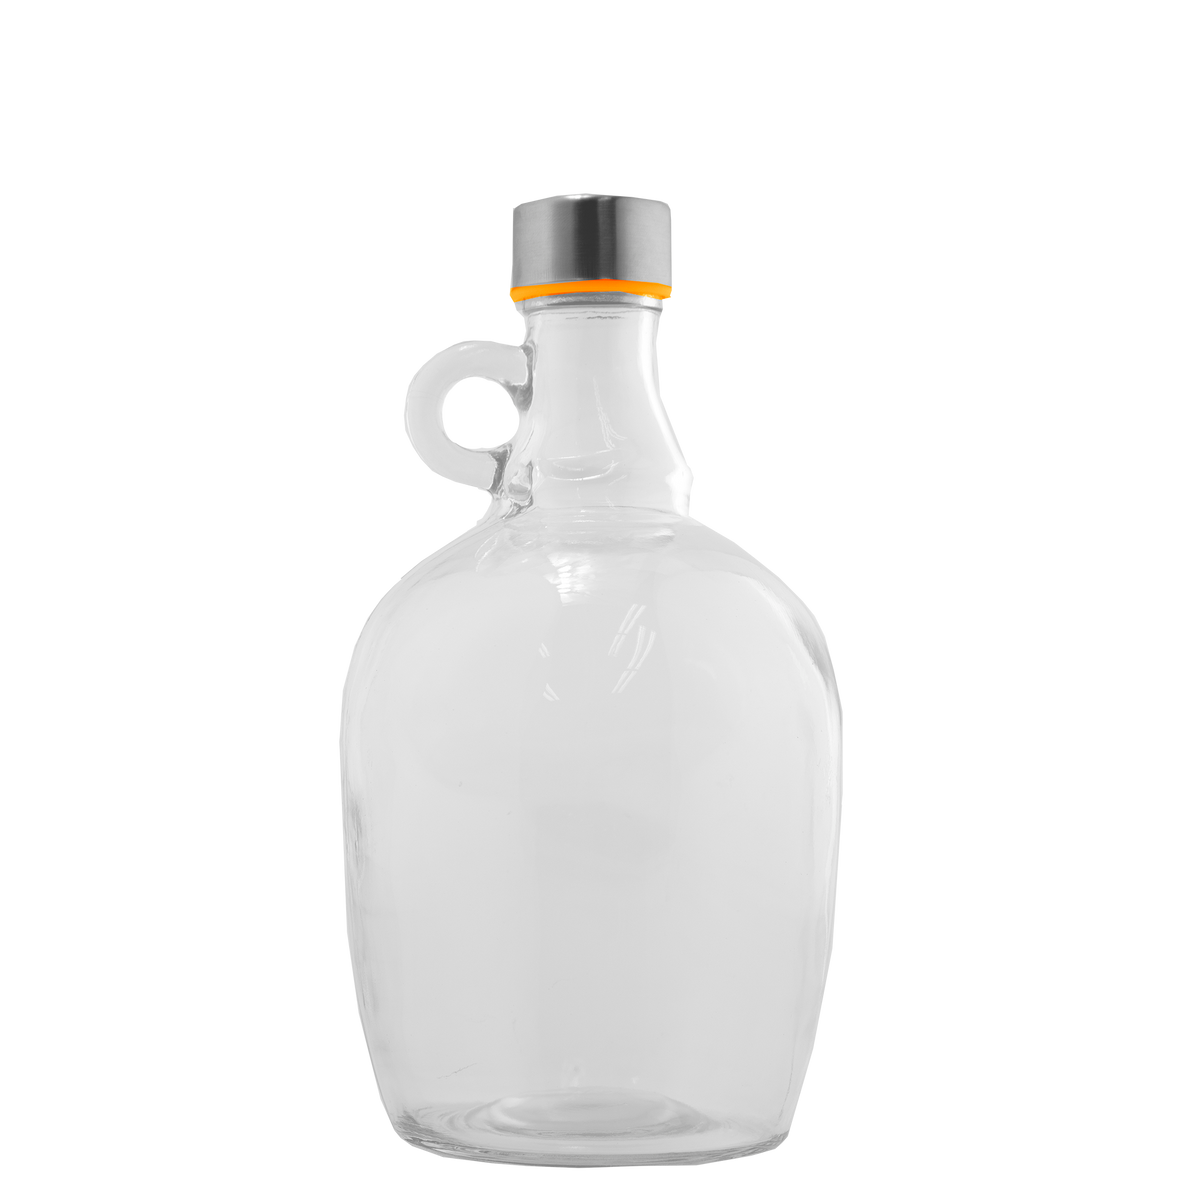 1 litre Glass Flagon ideal for home preserving, brewing or nut milks